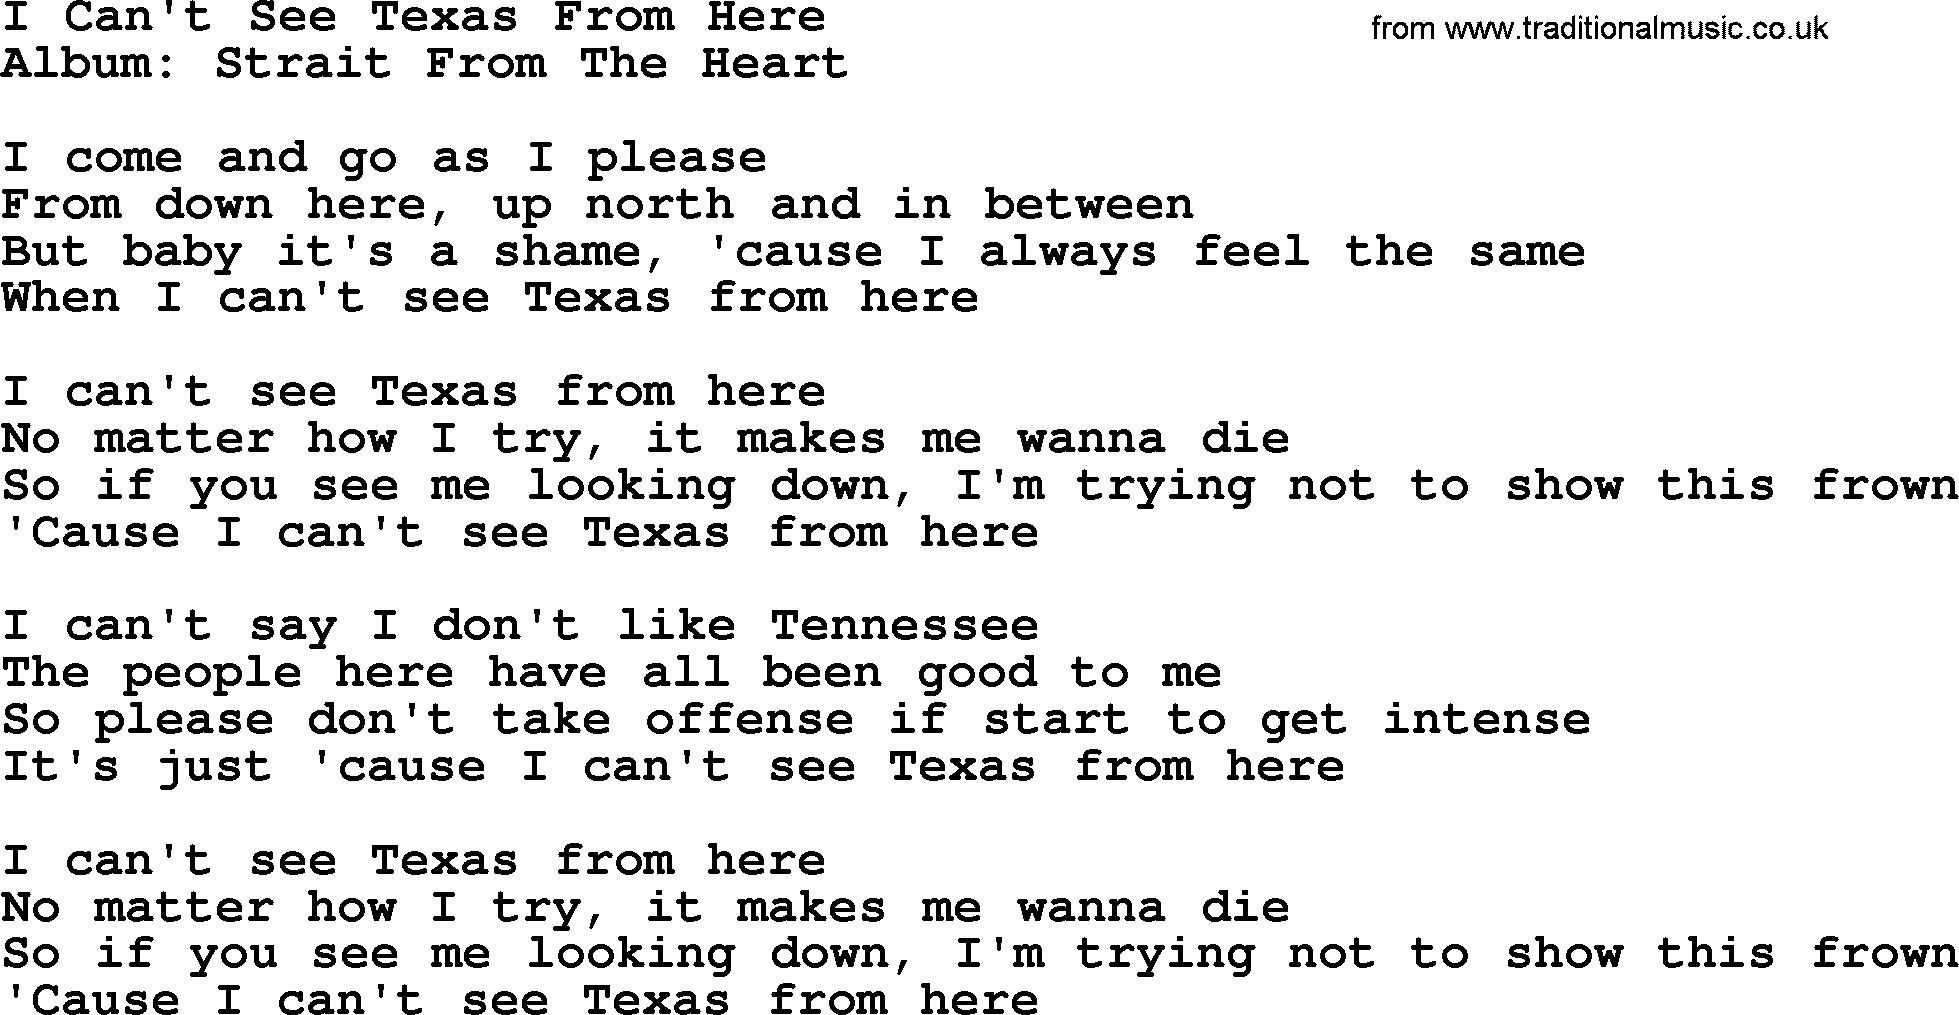 George Strait song: I Can't See Texas From Here, lyrics